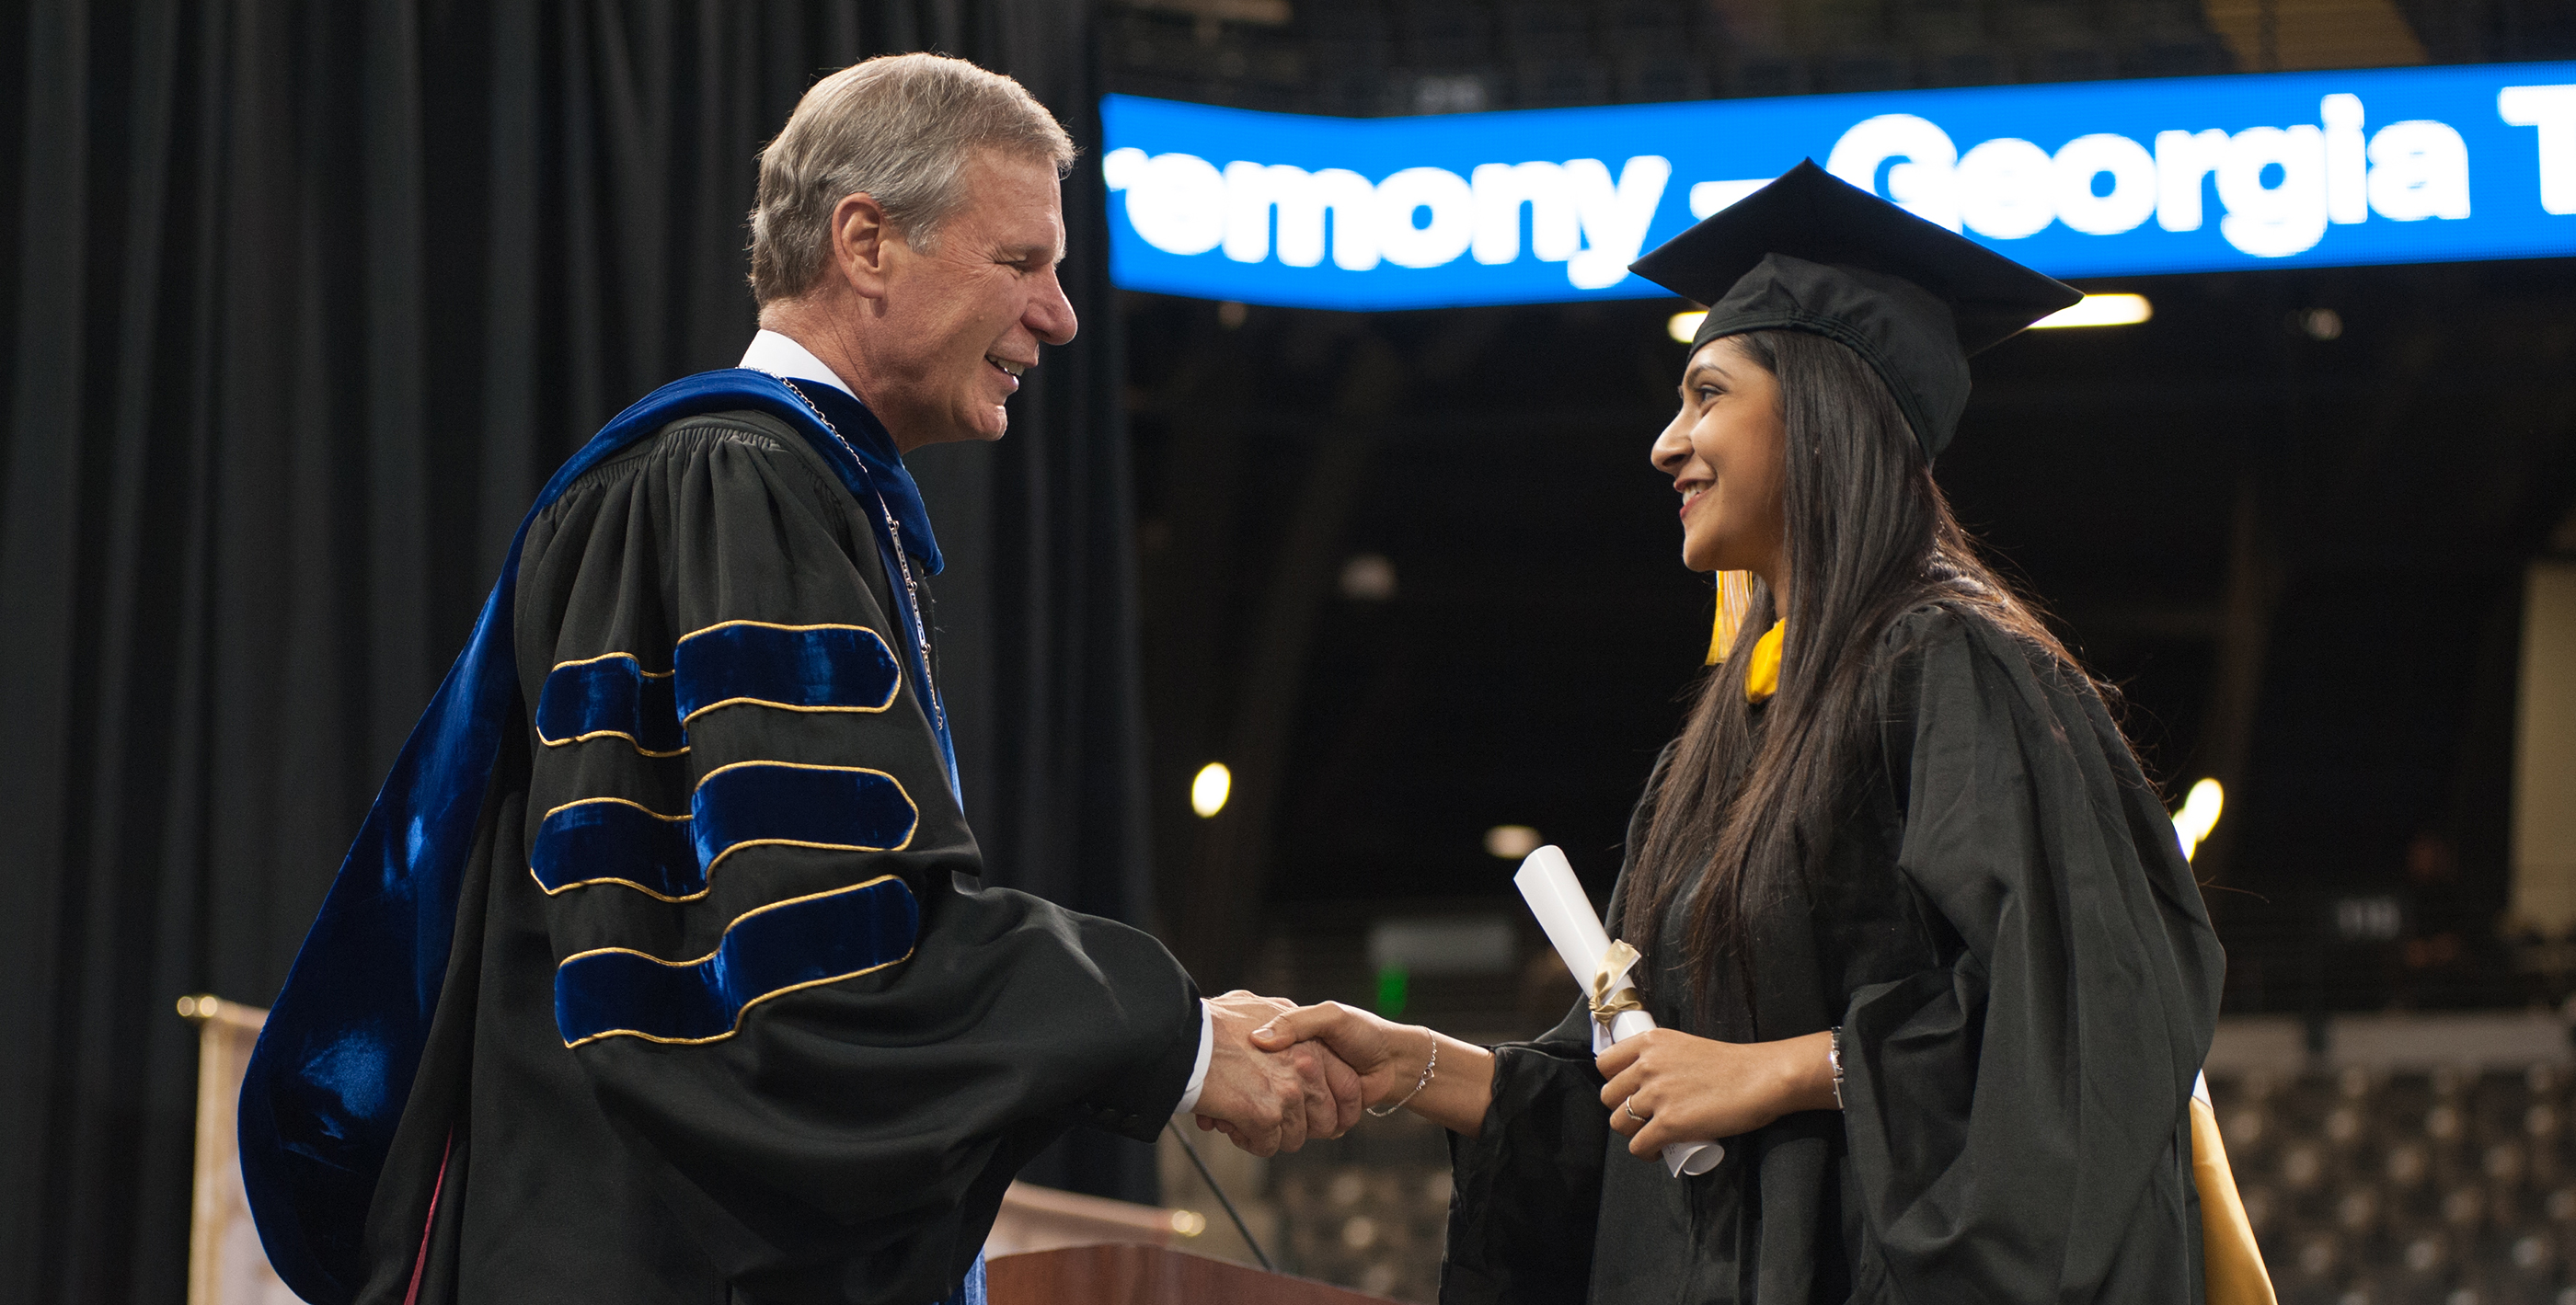 Georgia Tech President G.P. "Bud" Peterson personally shakes hands with every graduate at each commencement ceremony.